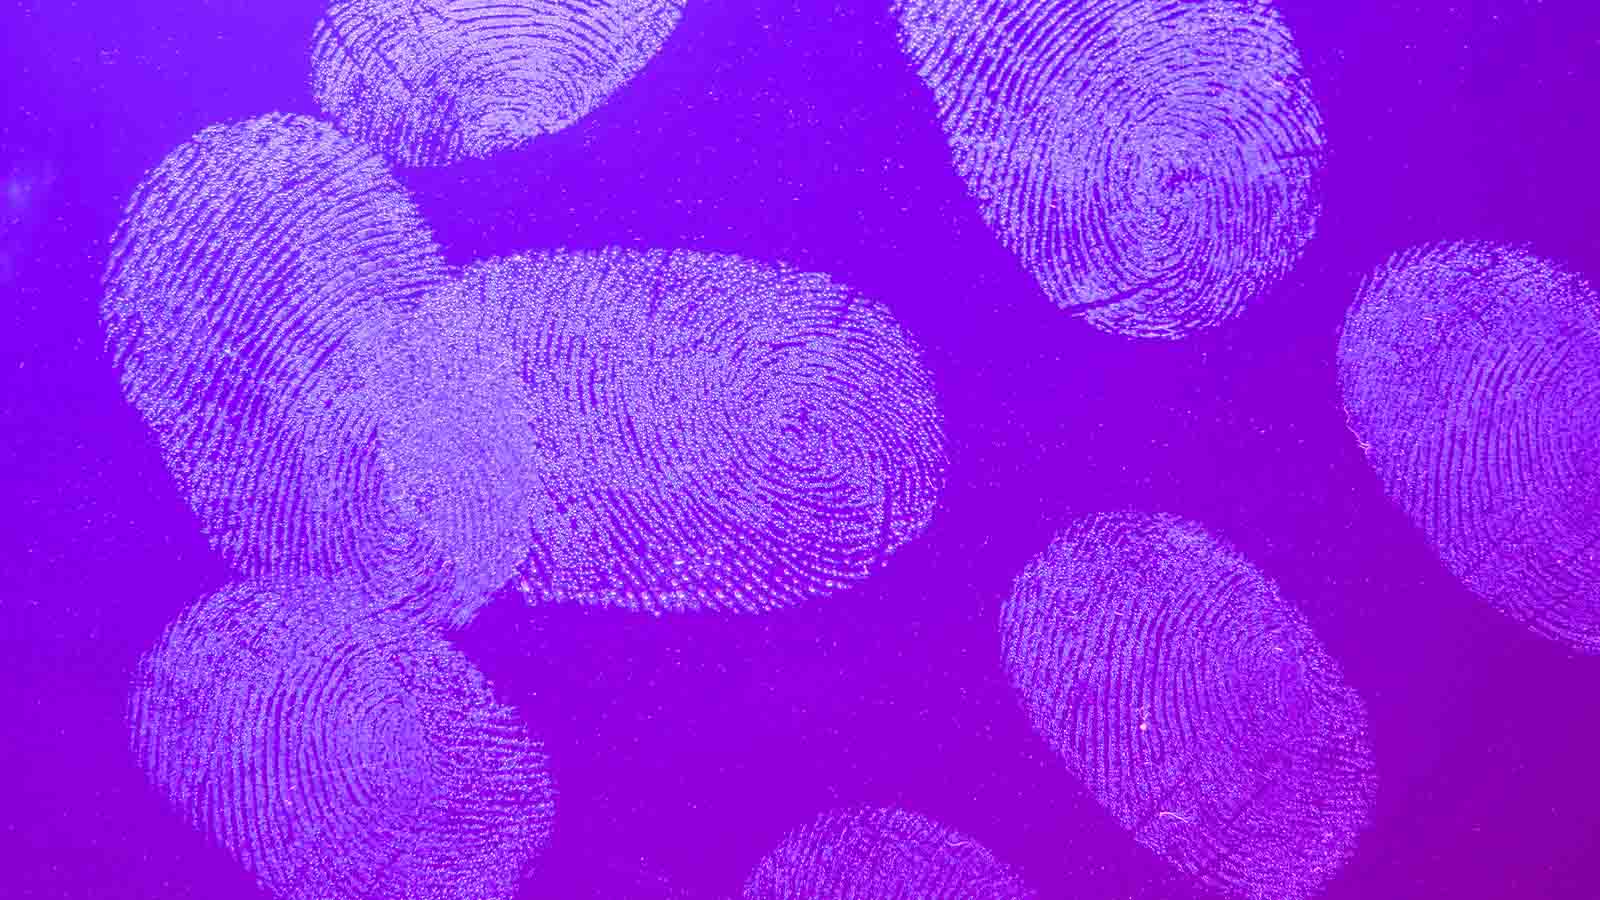 Fingerprints on glass with red and blue background